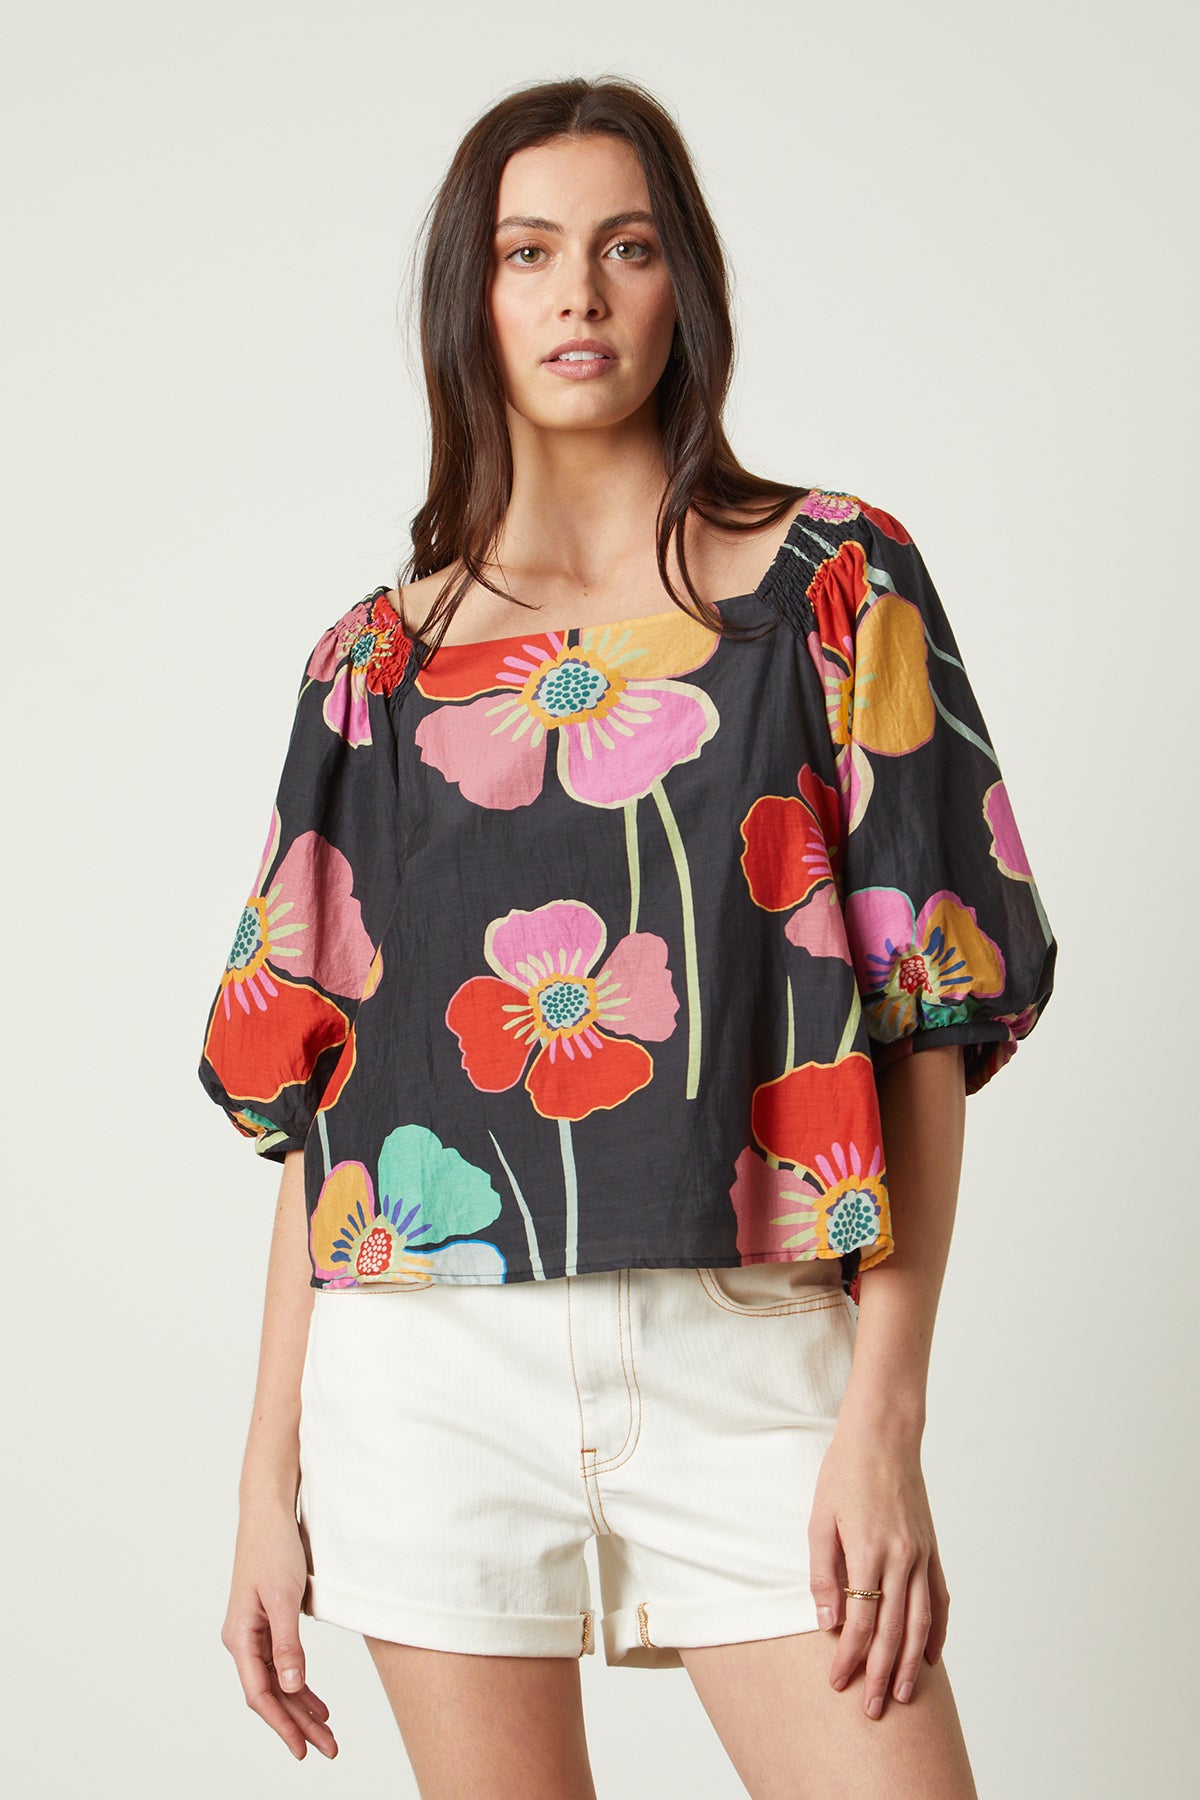   Jasmine Top in bold floral with black background and white denim shorts front 